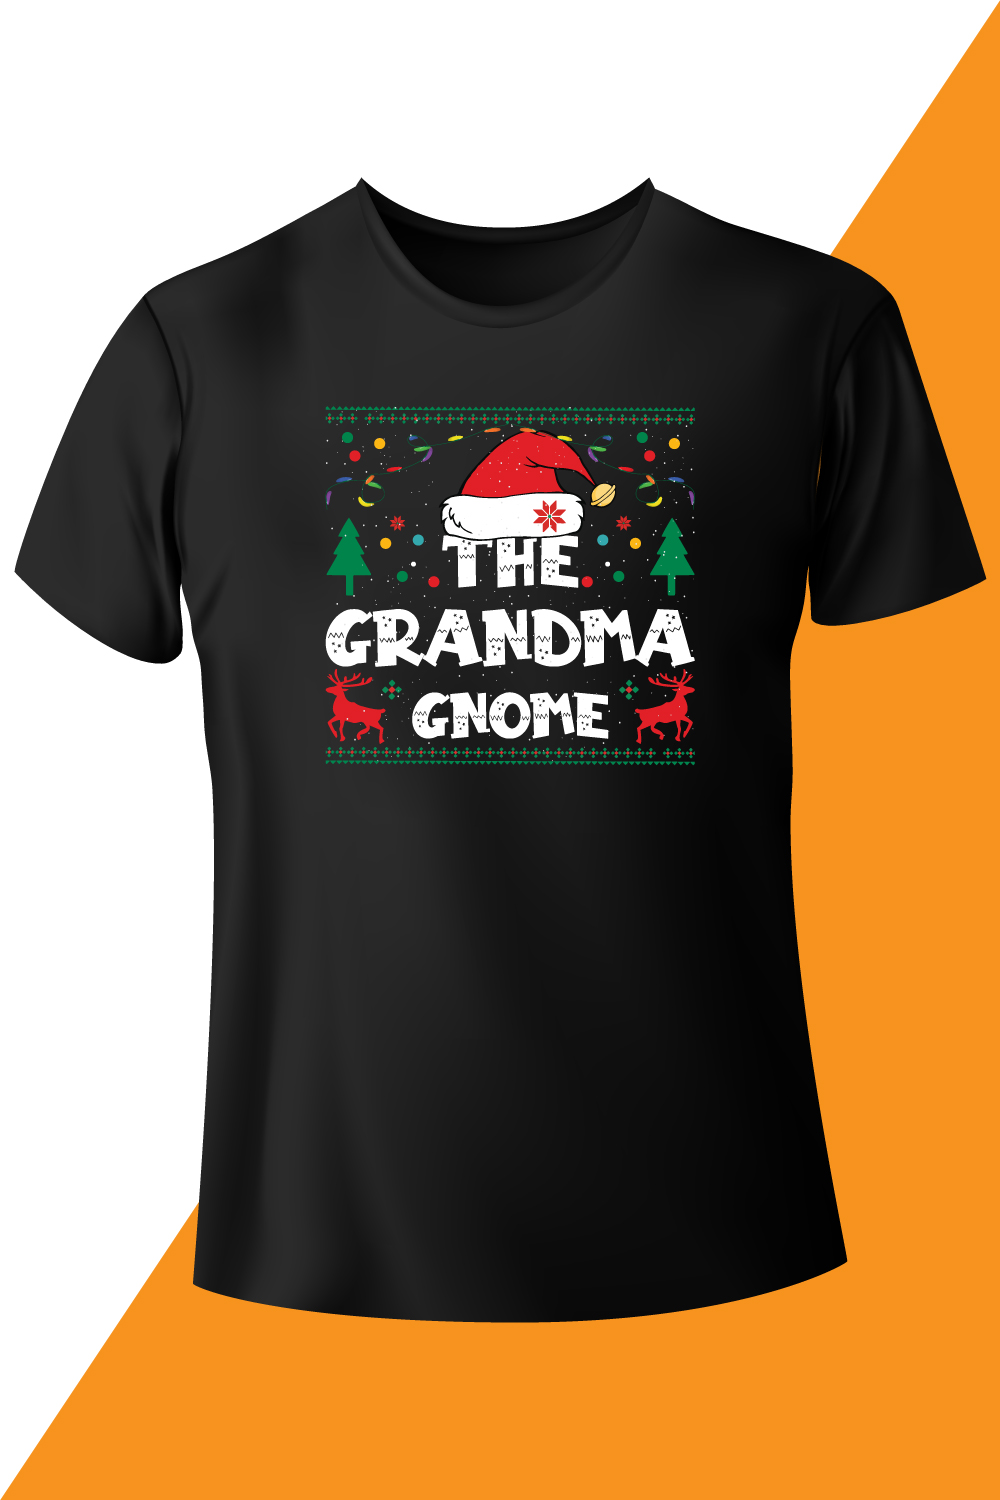 Image of a black t-shirt with a charming inscription The grandma gnome.